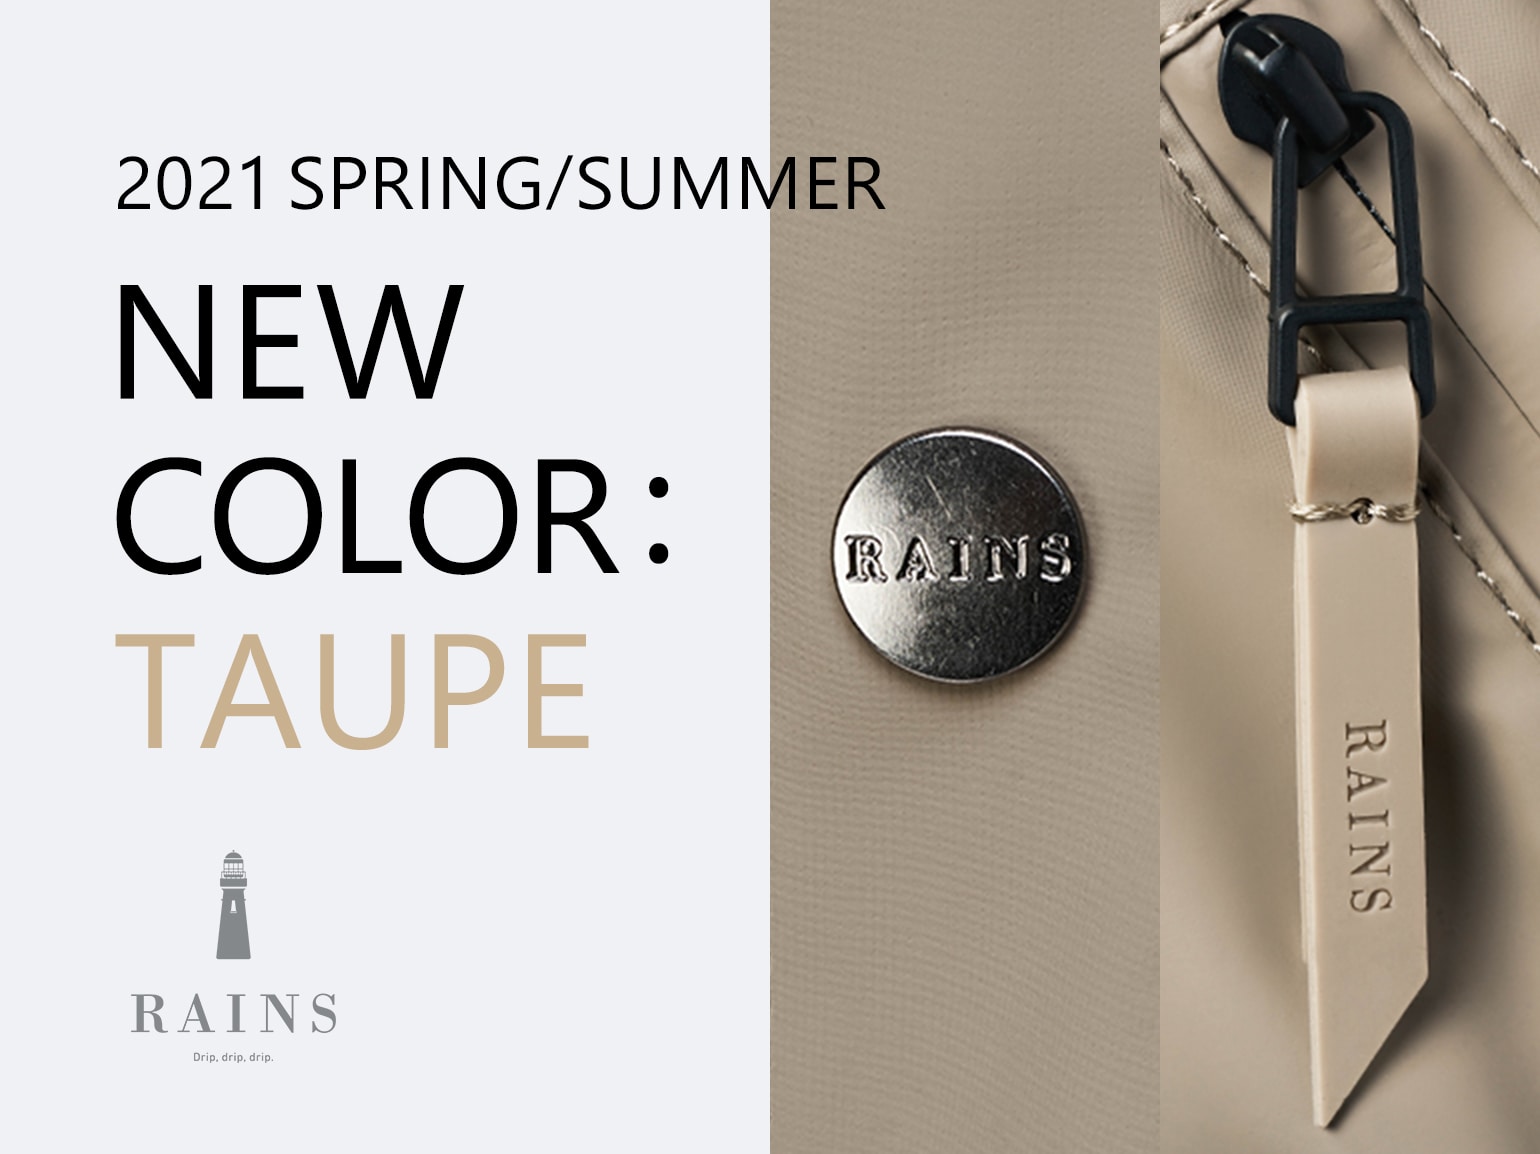 2021 SPRING/SUMMER NEW COLOR : TAUPE